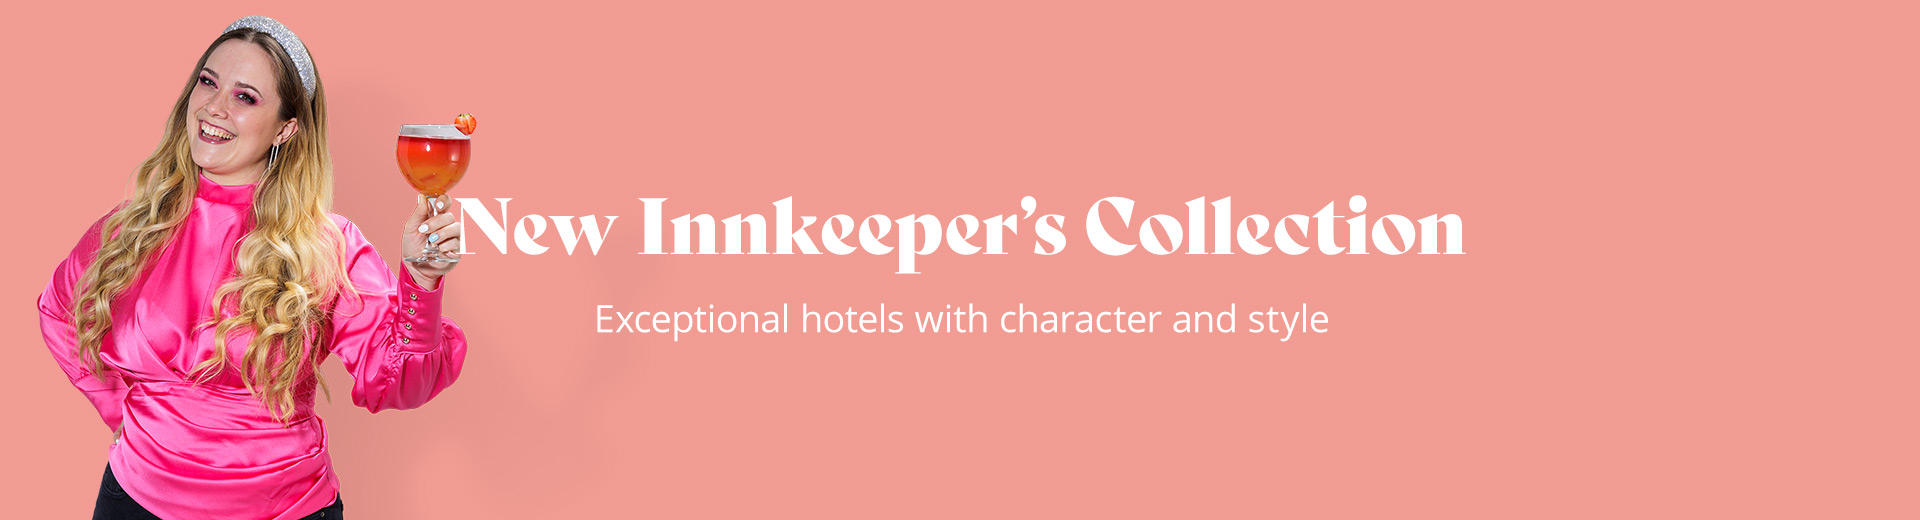 New Innkeeper’s Collection: Exceptional hotels with character and style.